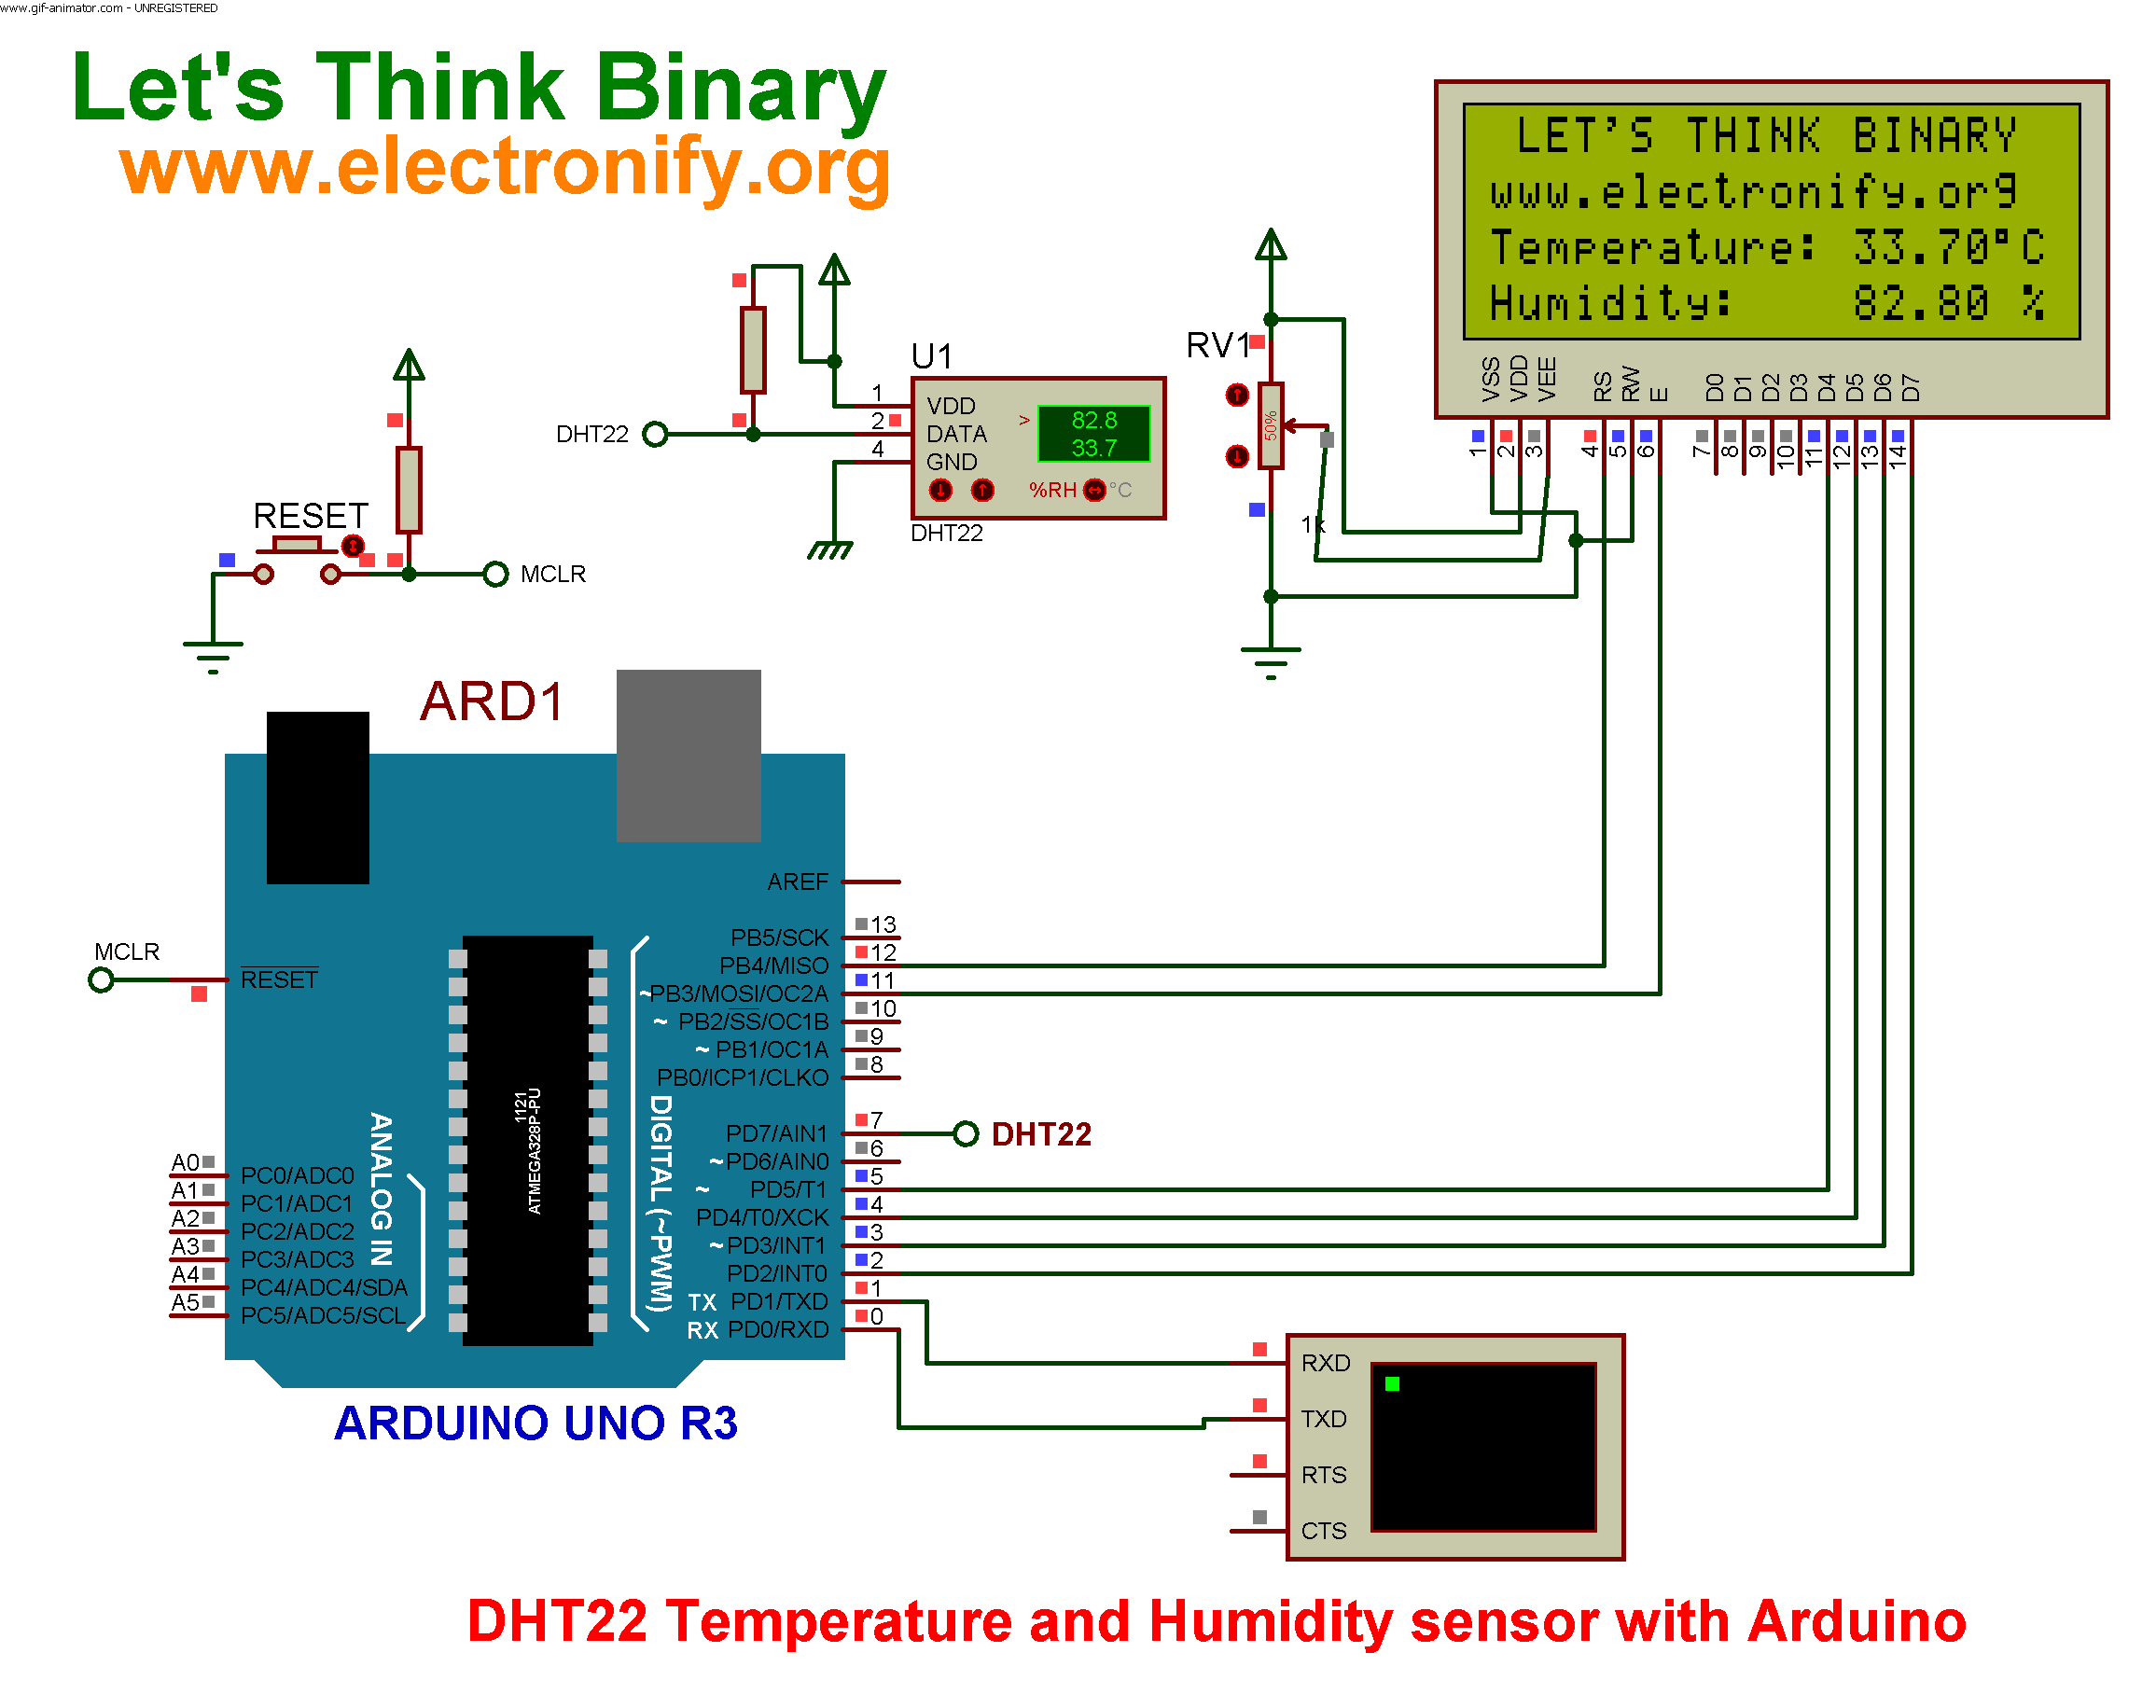 Temperature and Humidity monitoring with DHT22 sensor ...